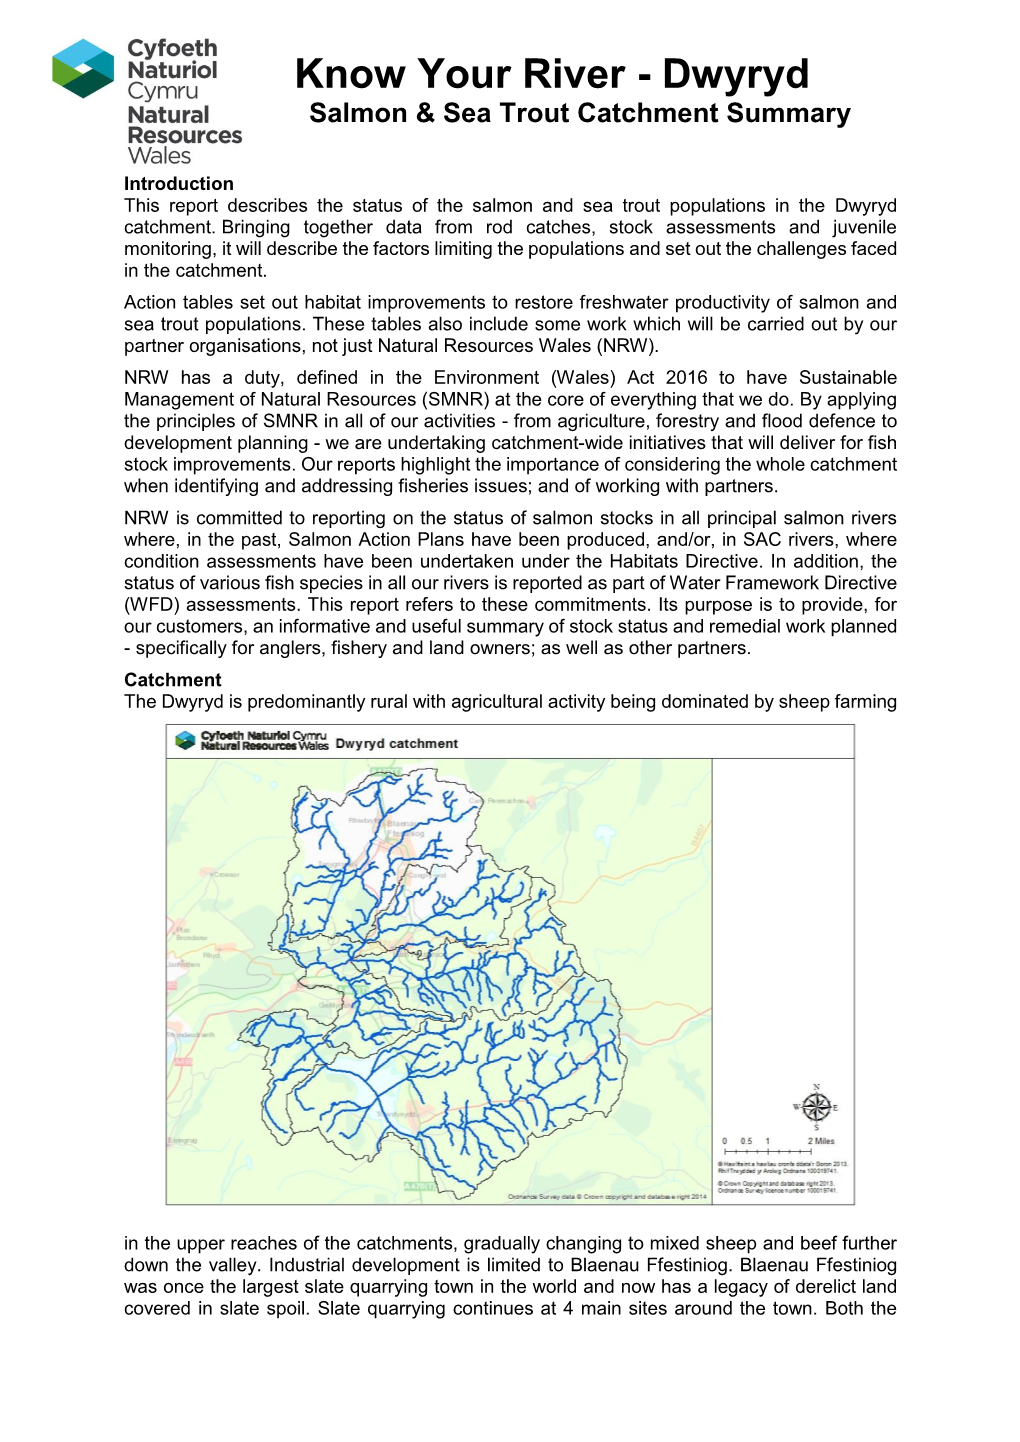 Know Your River - Dwyryd Salmon & Sea Trout Catchment Summary